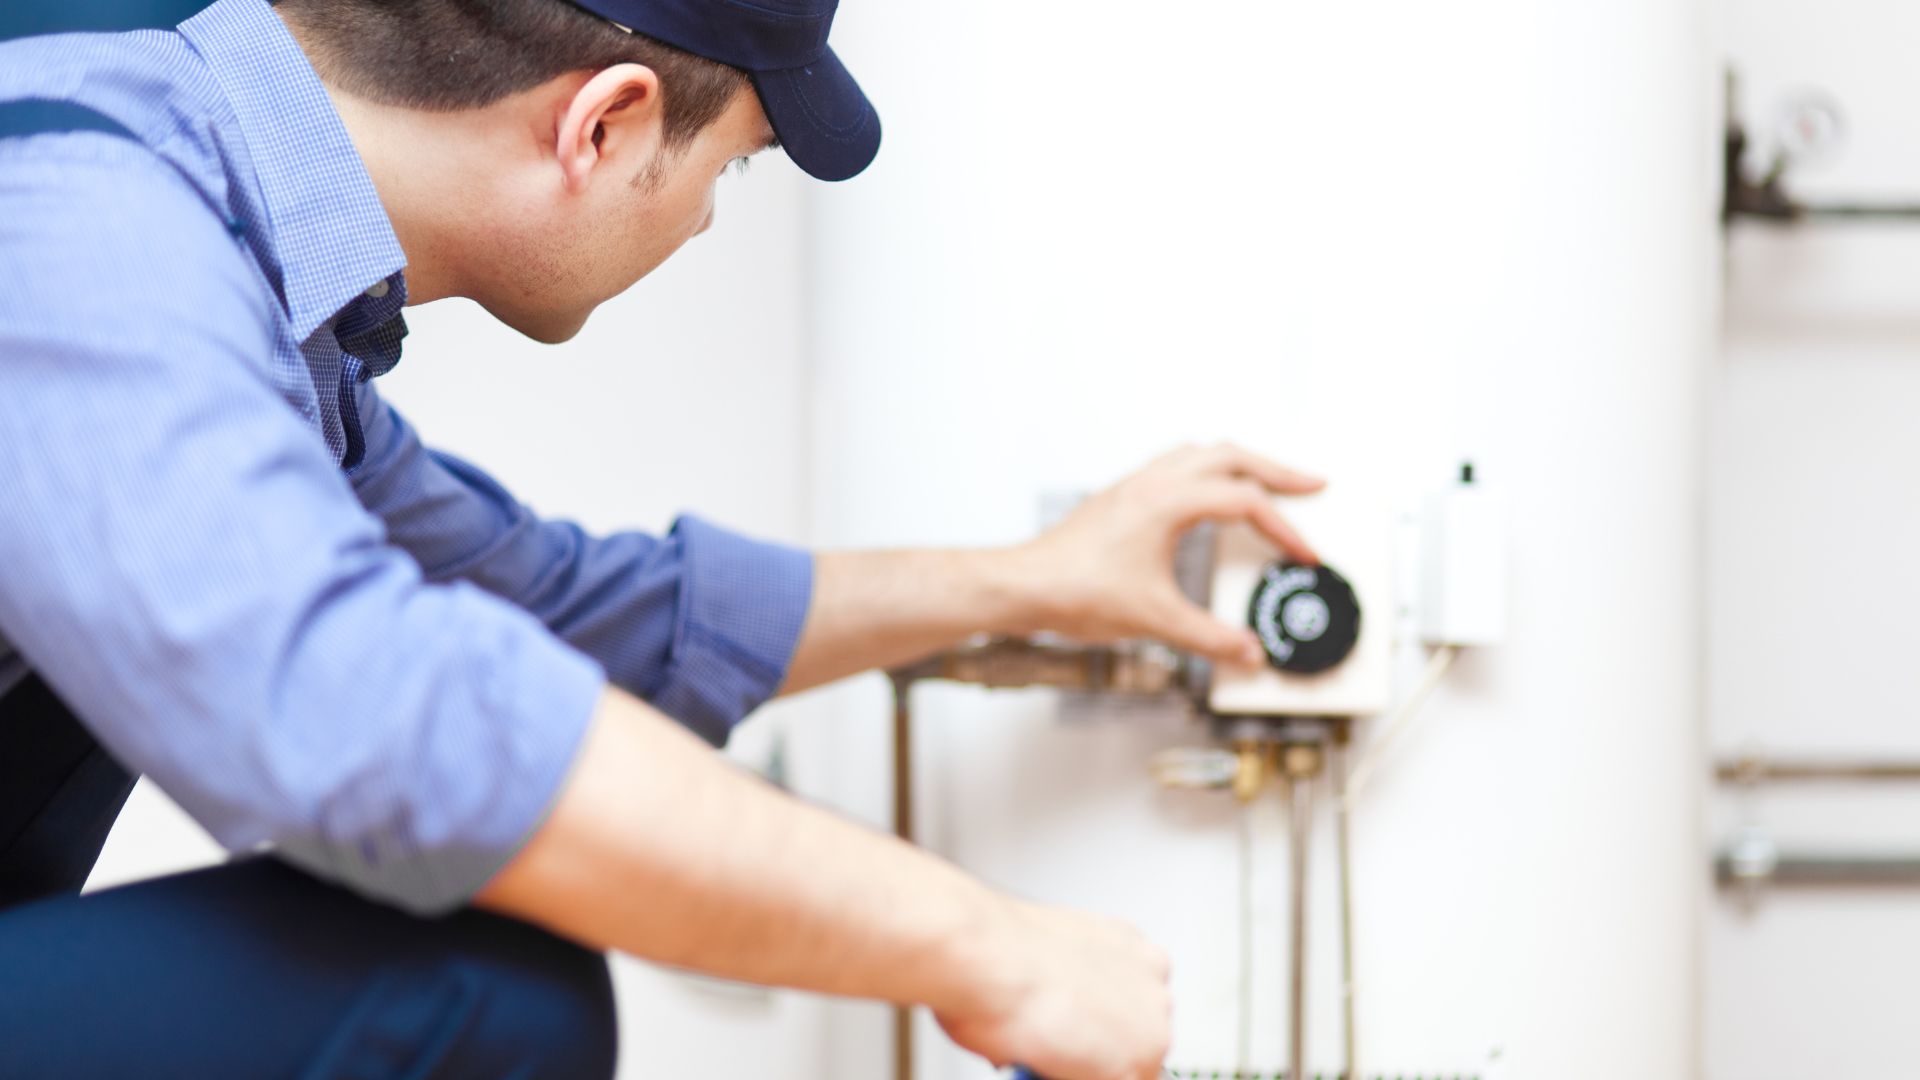 Reach out to CAN Plumbing and Drainage for comprehensive solutions to meet your water heater requirements, expertly handled by our team of plumbers.